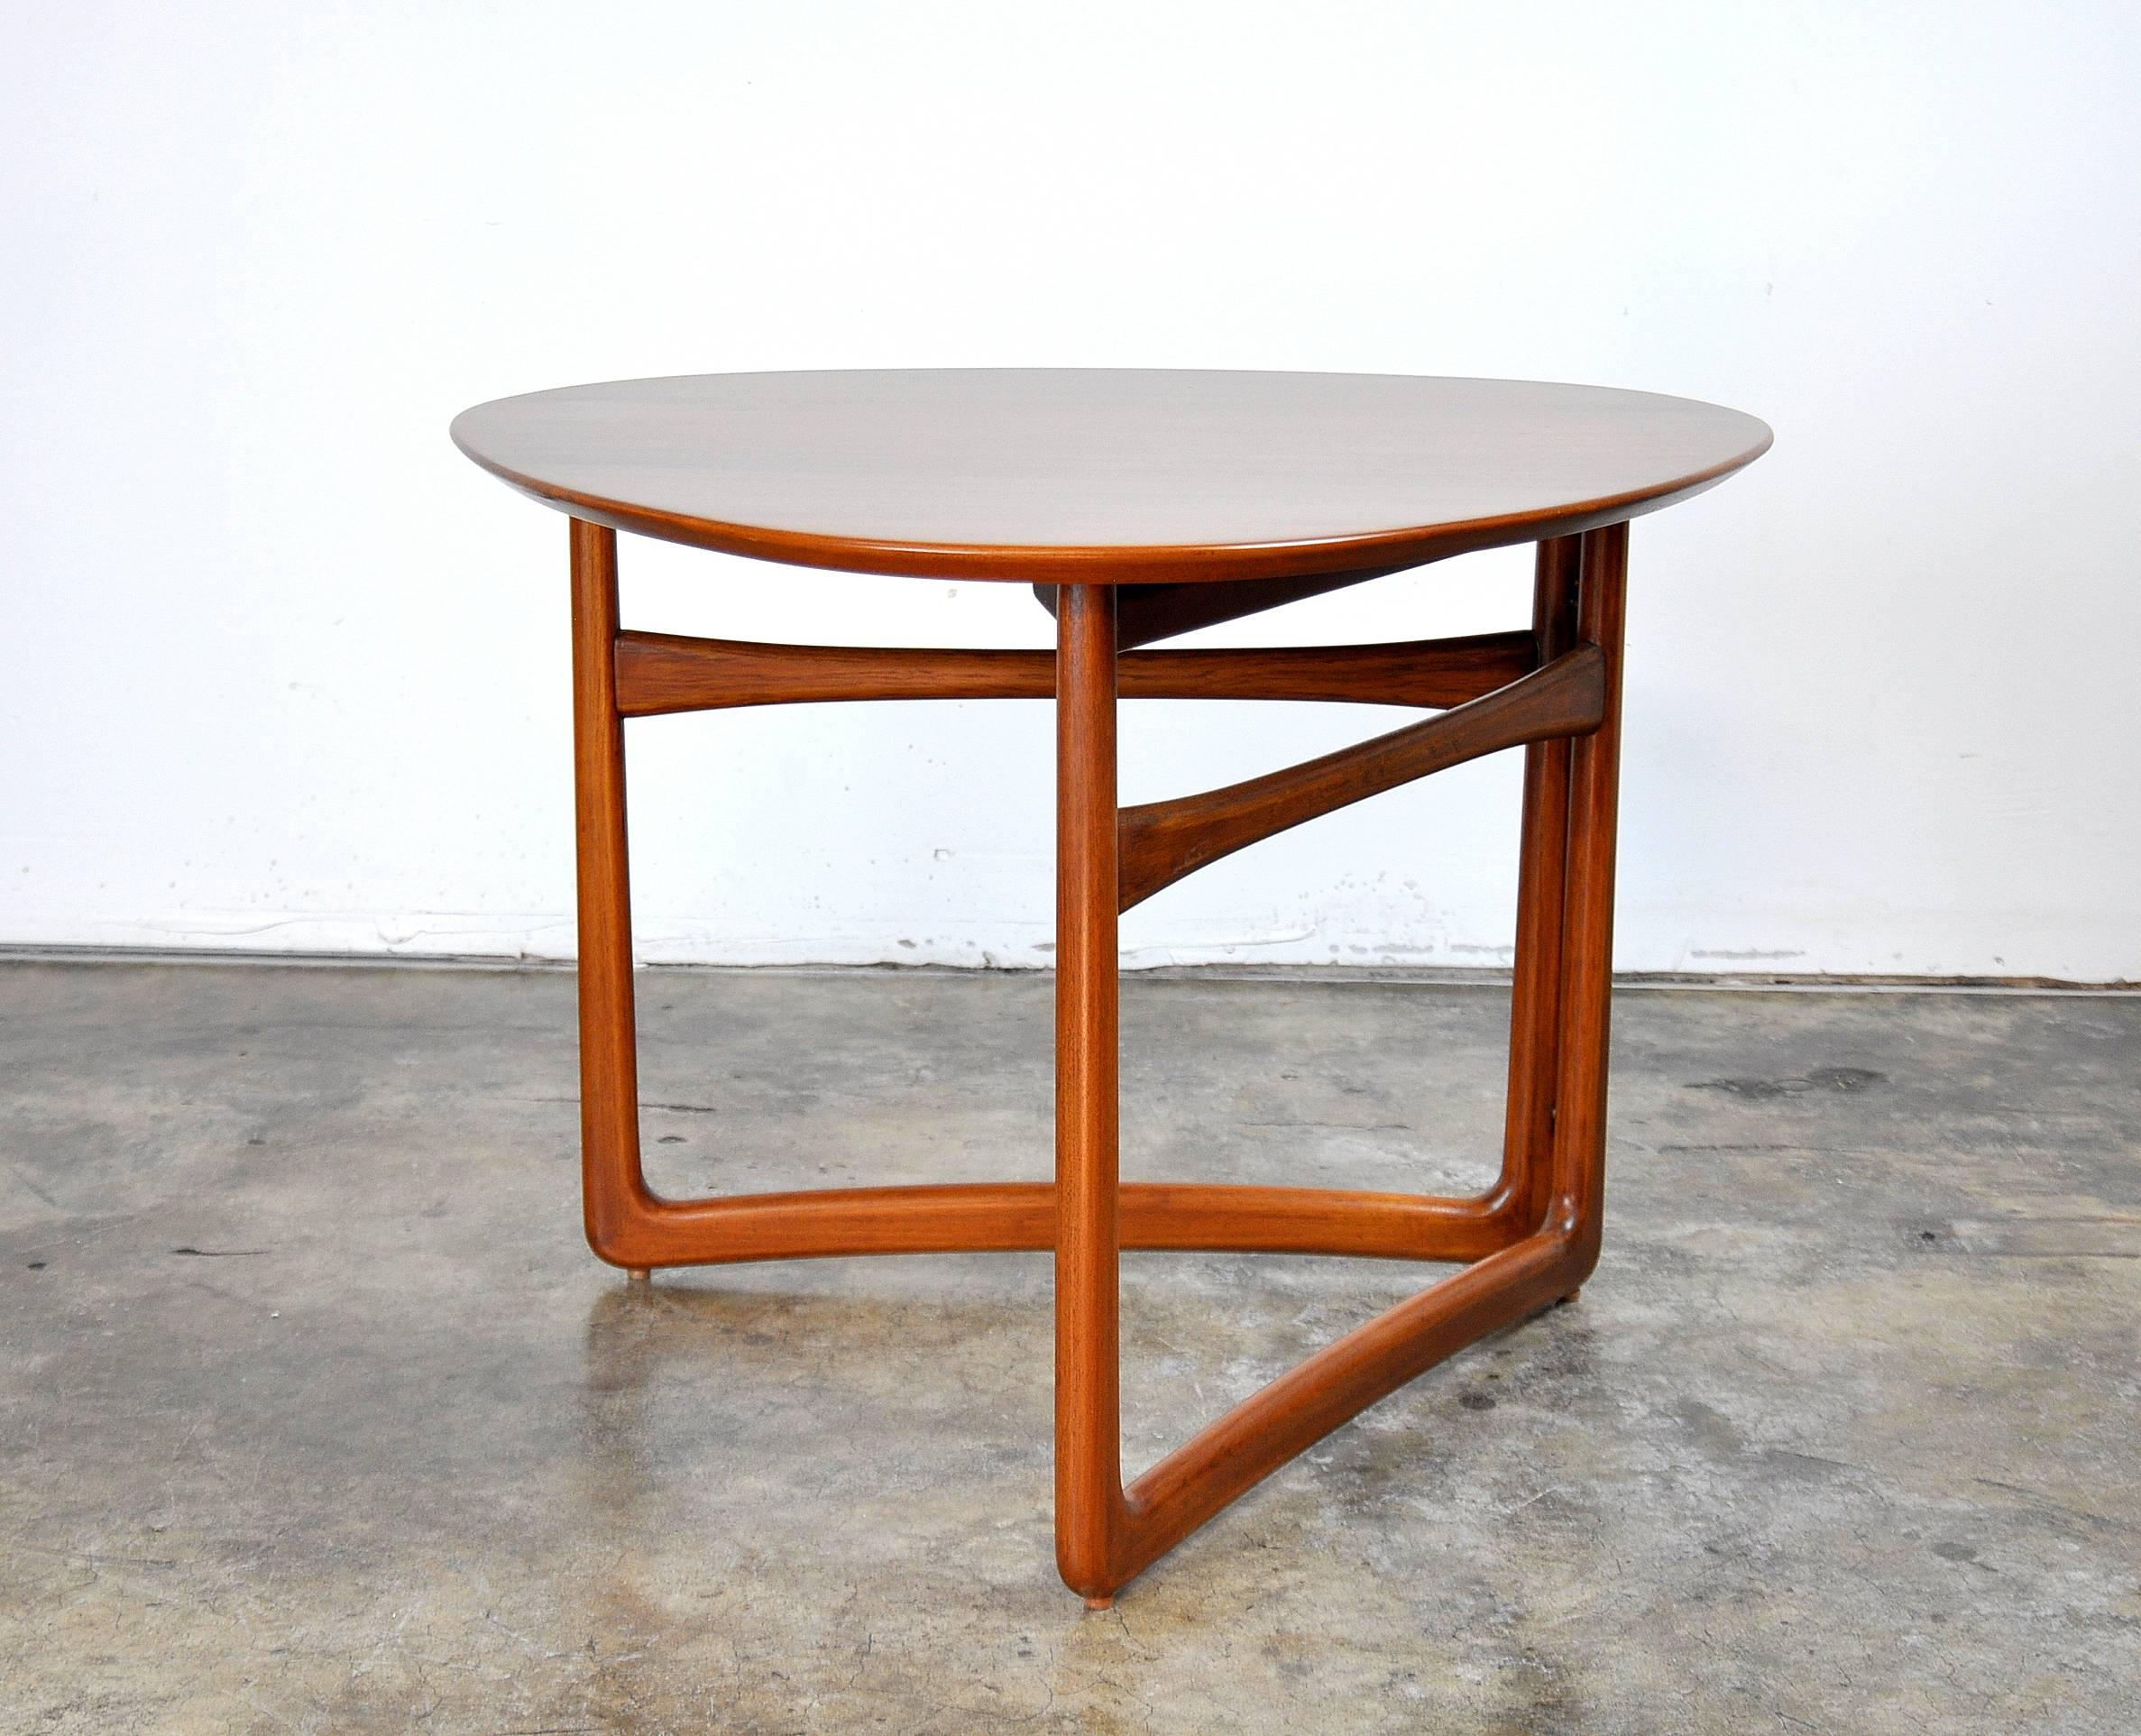 Gorgeous Mid-Century Danish Modern solid teak occasional table, model FD 18/57 designed by Peter Hvidt and Orla Mølgaard-Nielsen and manufactured by France and Daverkosen (pre France and Son) in the 1950s. The triangular top rests on a sculptural